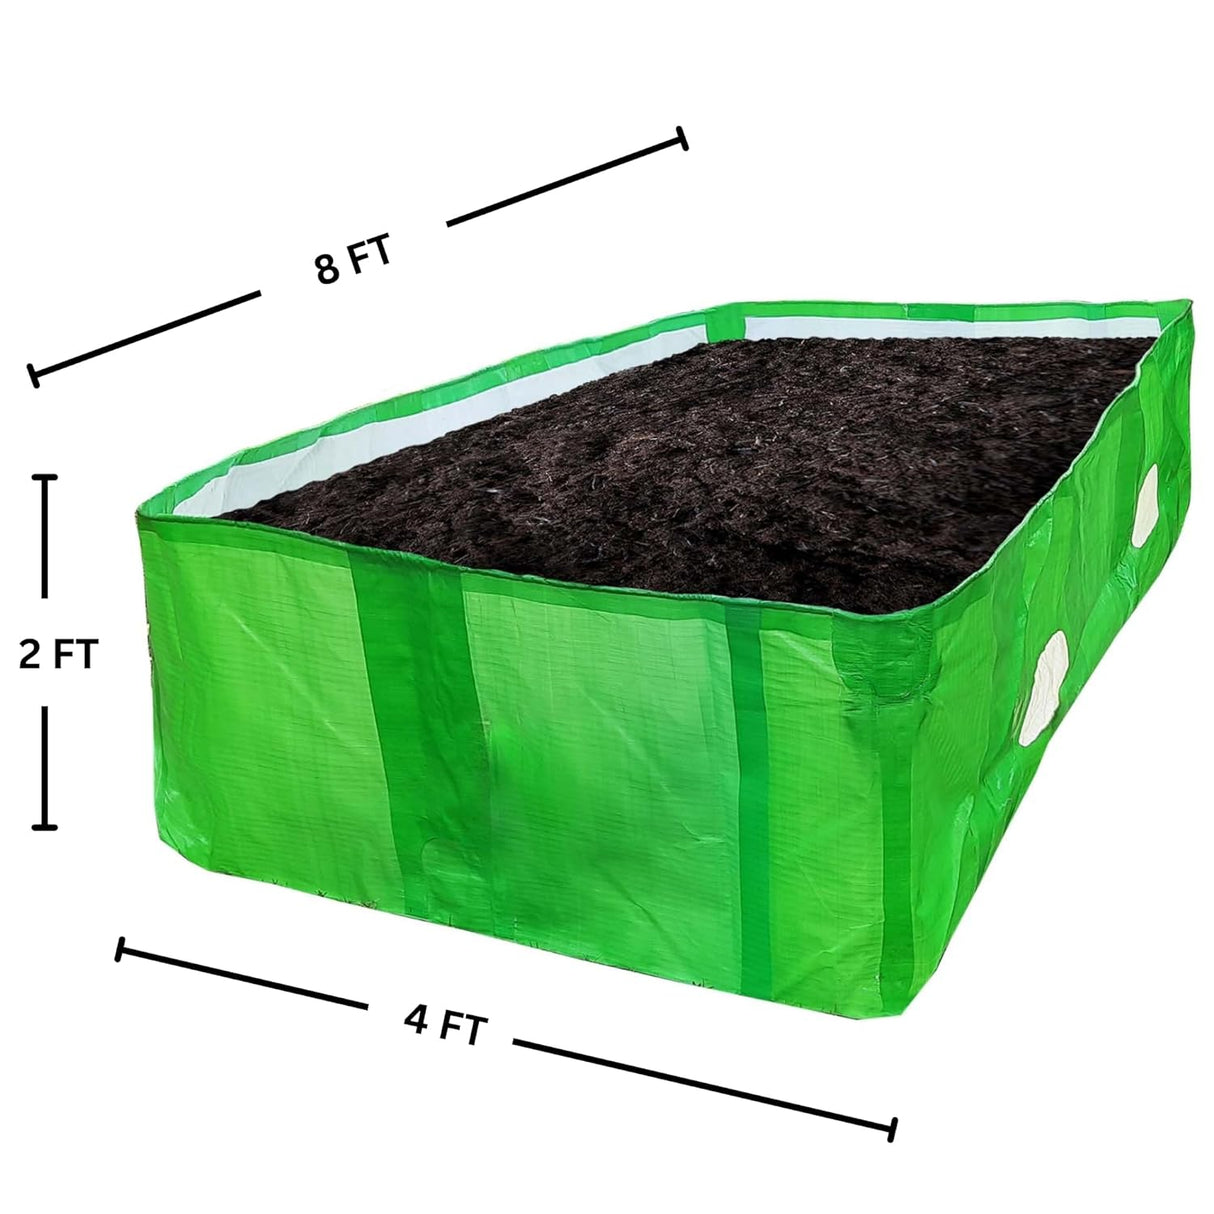 Singhal HDPE UV Stabilized Vermi Compost Bed 375 GSM, 8x4x2 Ft, 100% Virgin Quality Material, Green and White, Vermibed Agro Vermicompost Bed (Vermi Bed), Agro Vermi Compost Making Bed